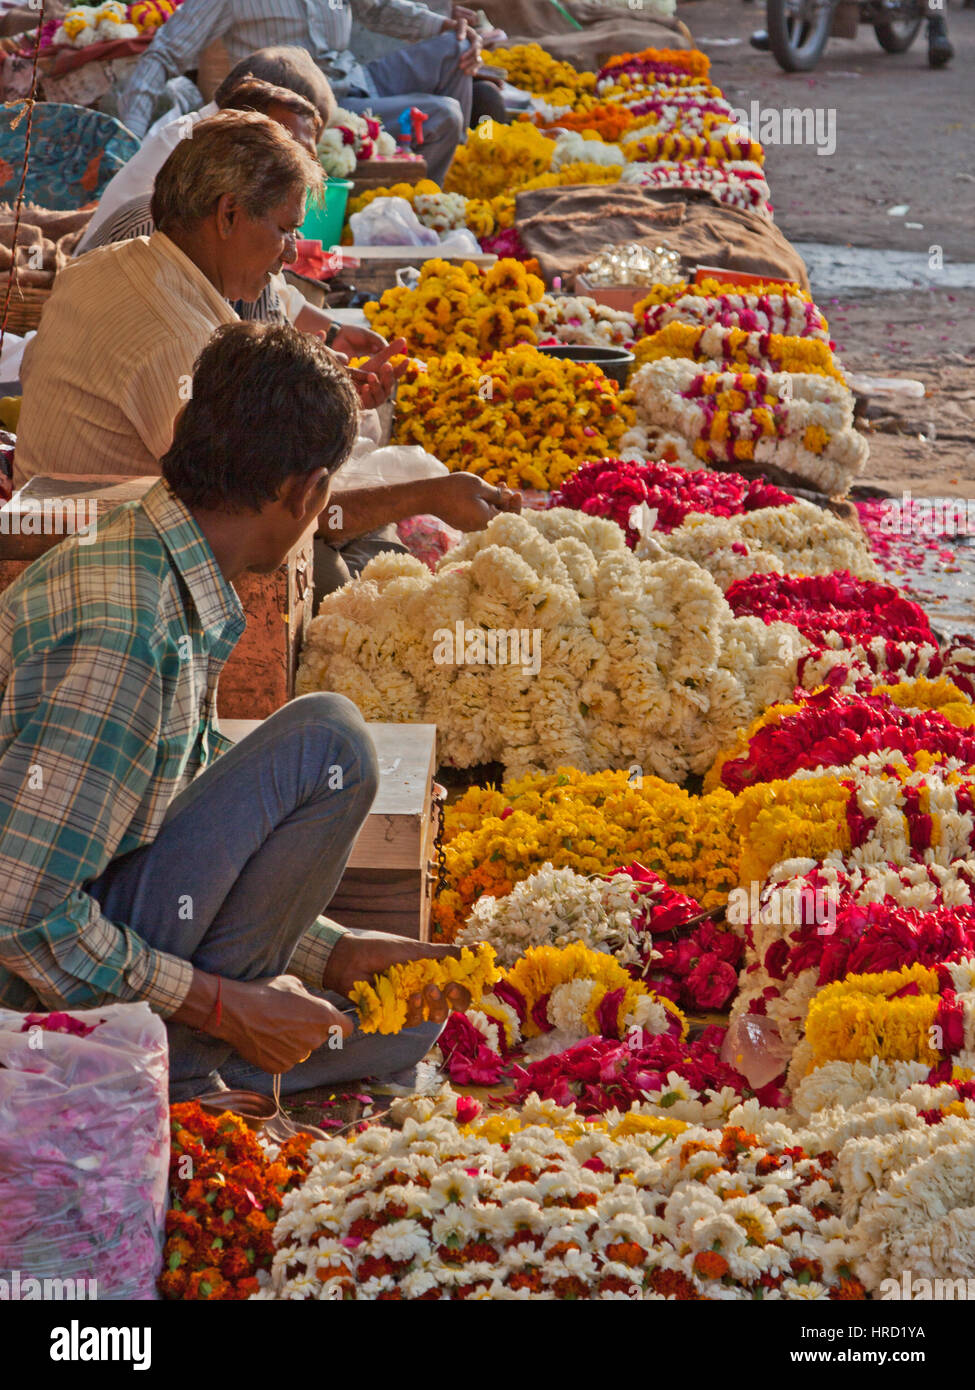 Traders selling flower garlands and petals for worshippers in a nearby Hindu temple in the Tripolia Bazaar district of Jaipur in Rajasthan, India Stock Photo